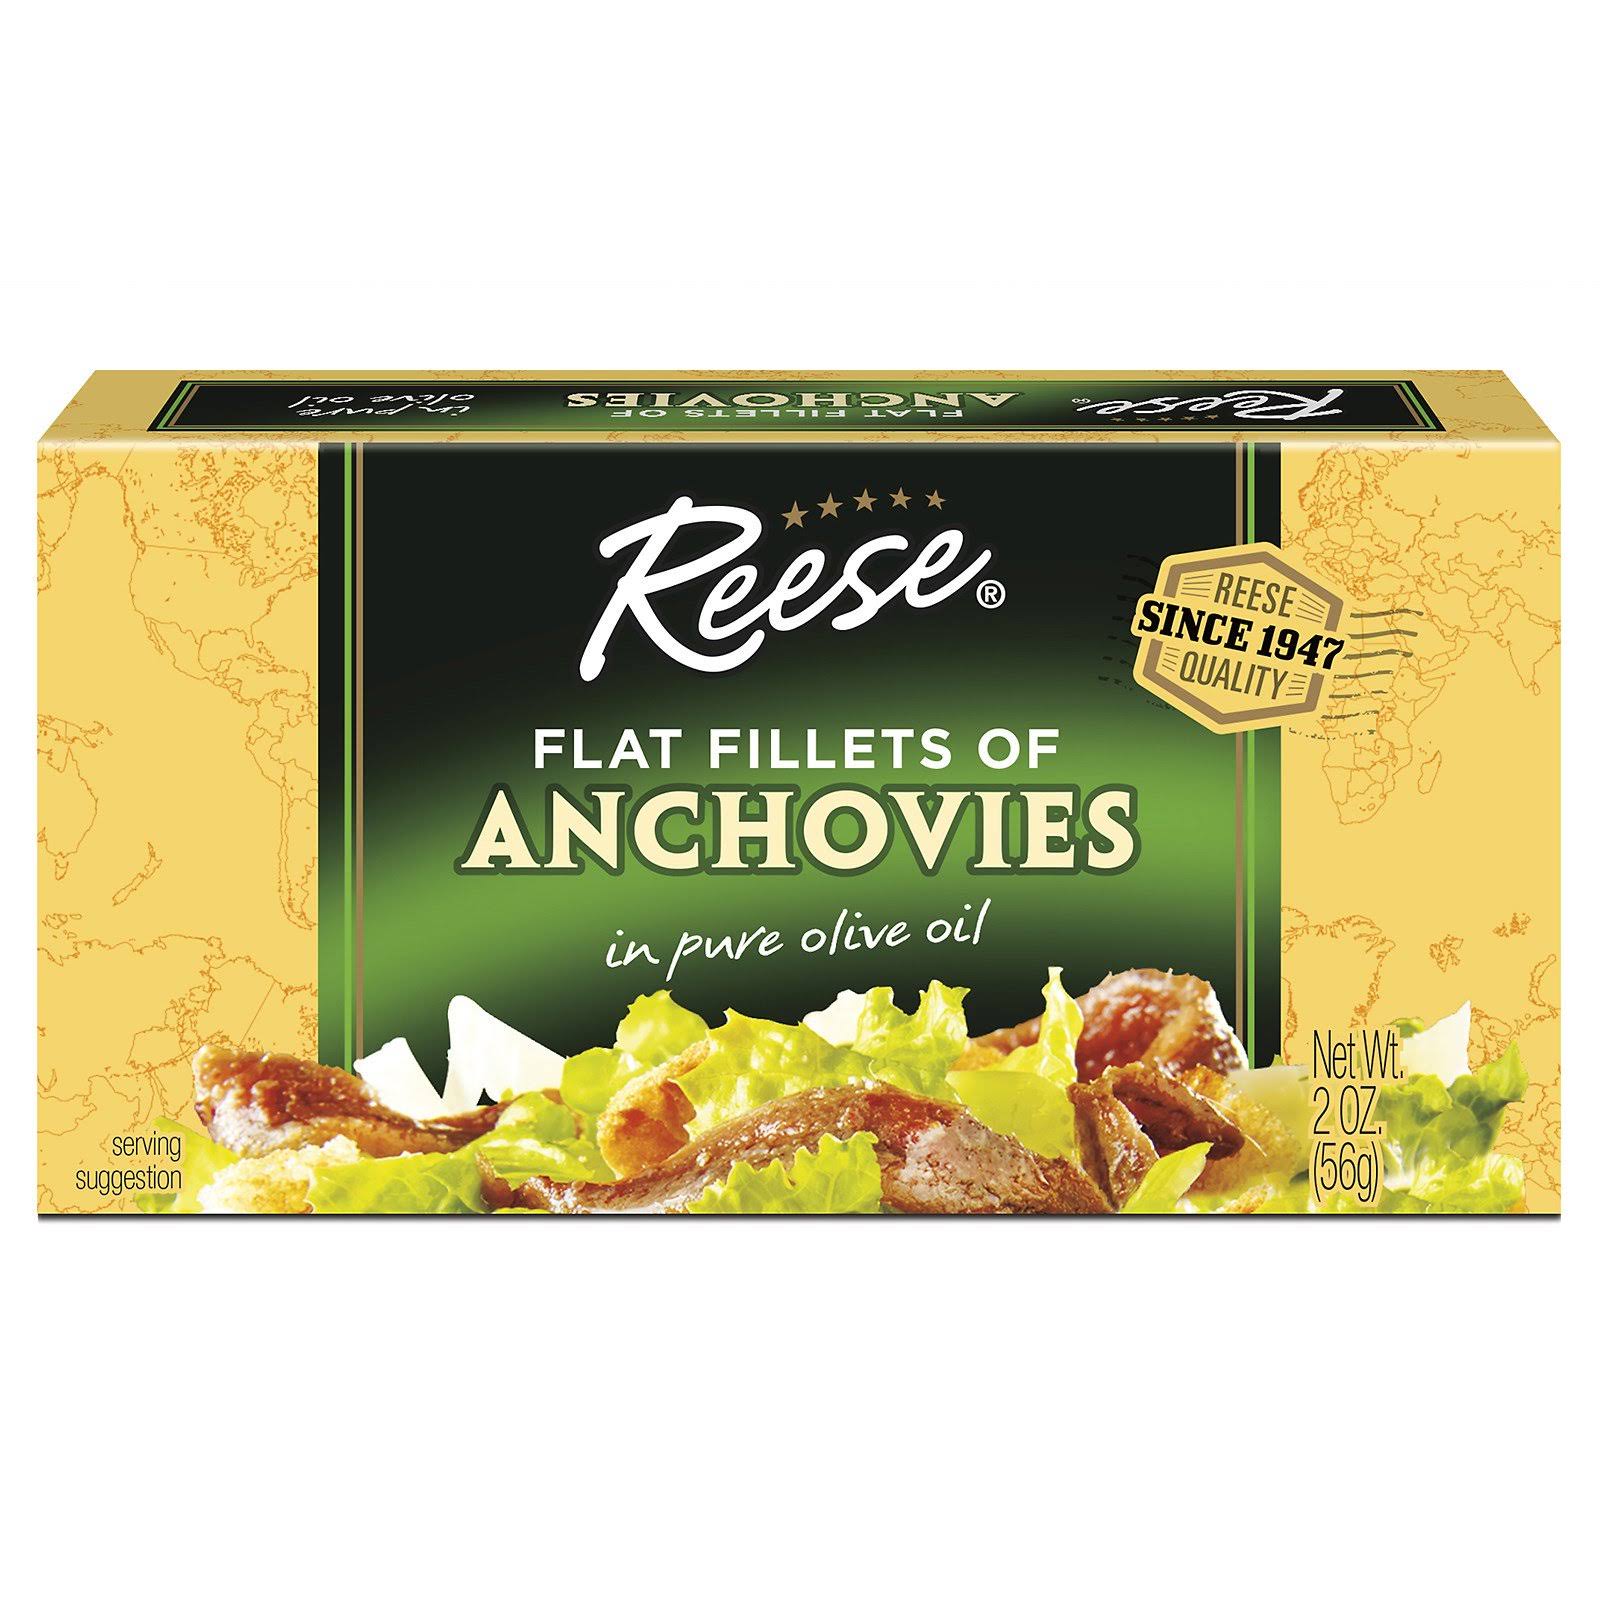 Reese Flat Fillets of Anchovies in Pure Olive Oil - 2oz